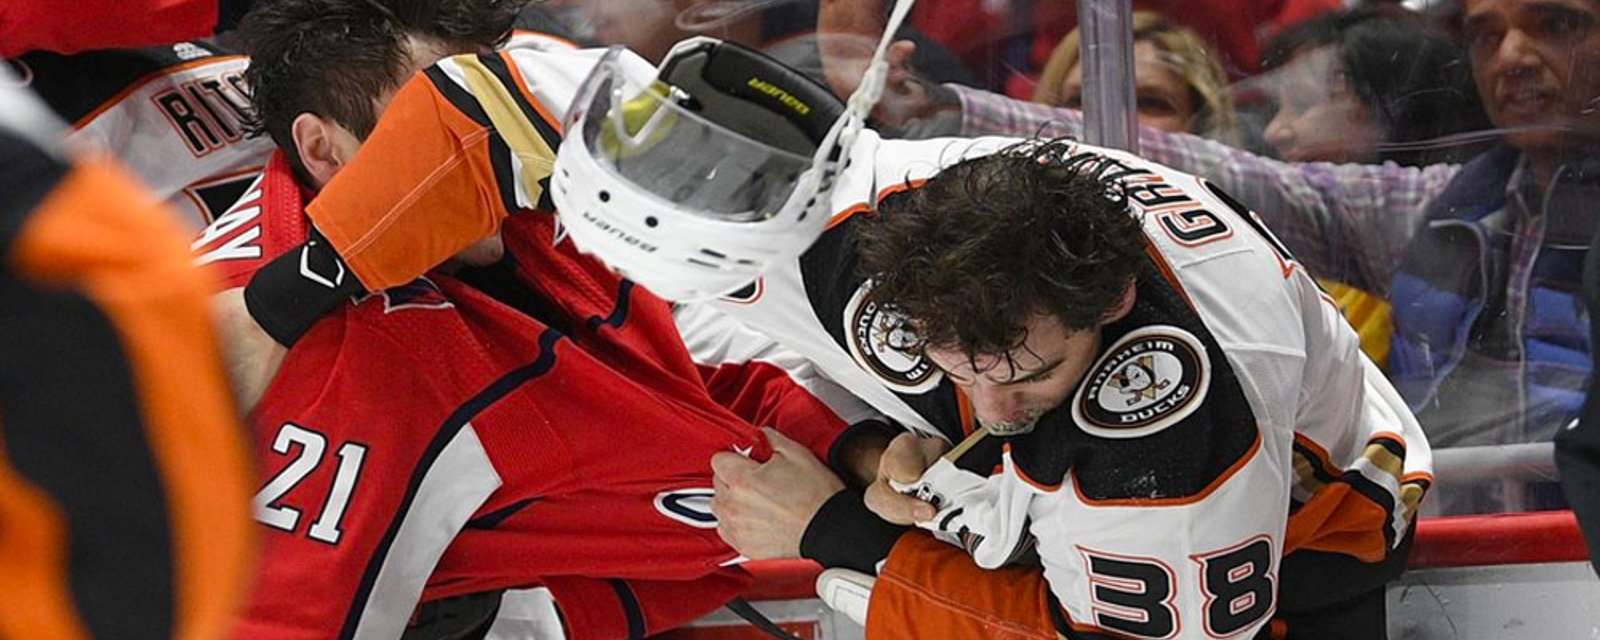 Disgusting spitting incident sparks all out brawl between Ducks and Capitals